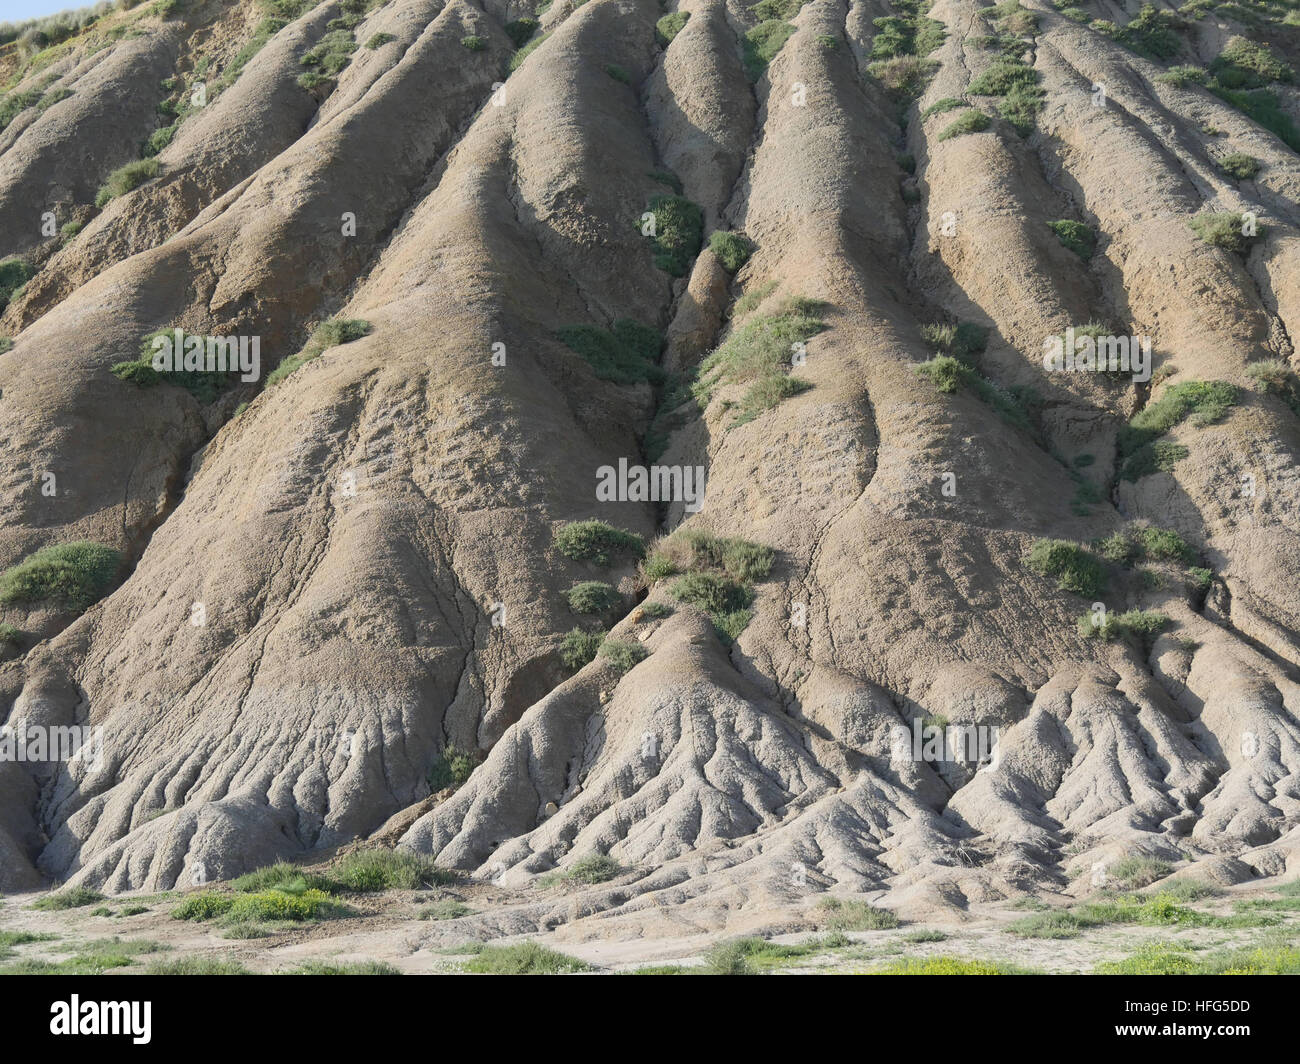 Erosion of the Mountain, Valley of the Temples, Vallee di Templi, Agrigento, Sicily, Italy Stock Photo